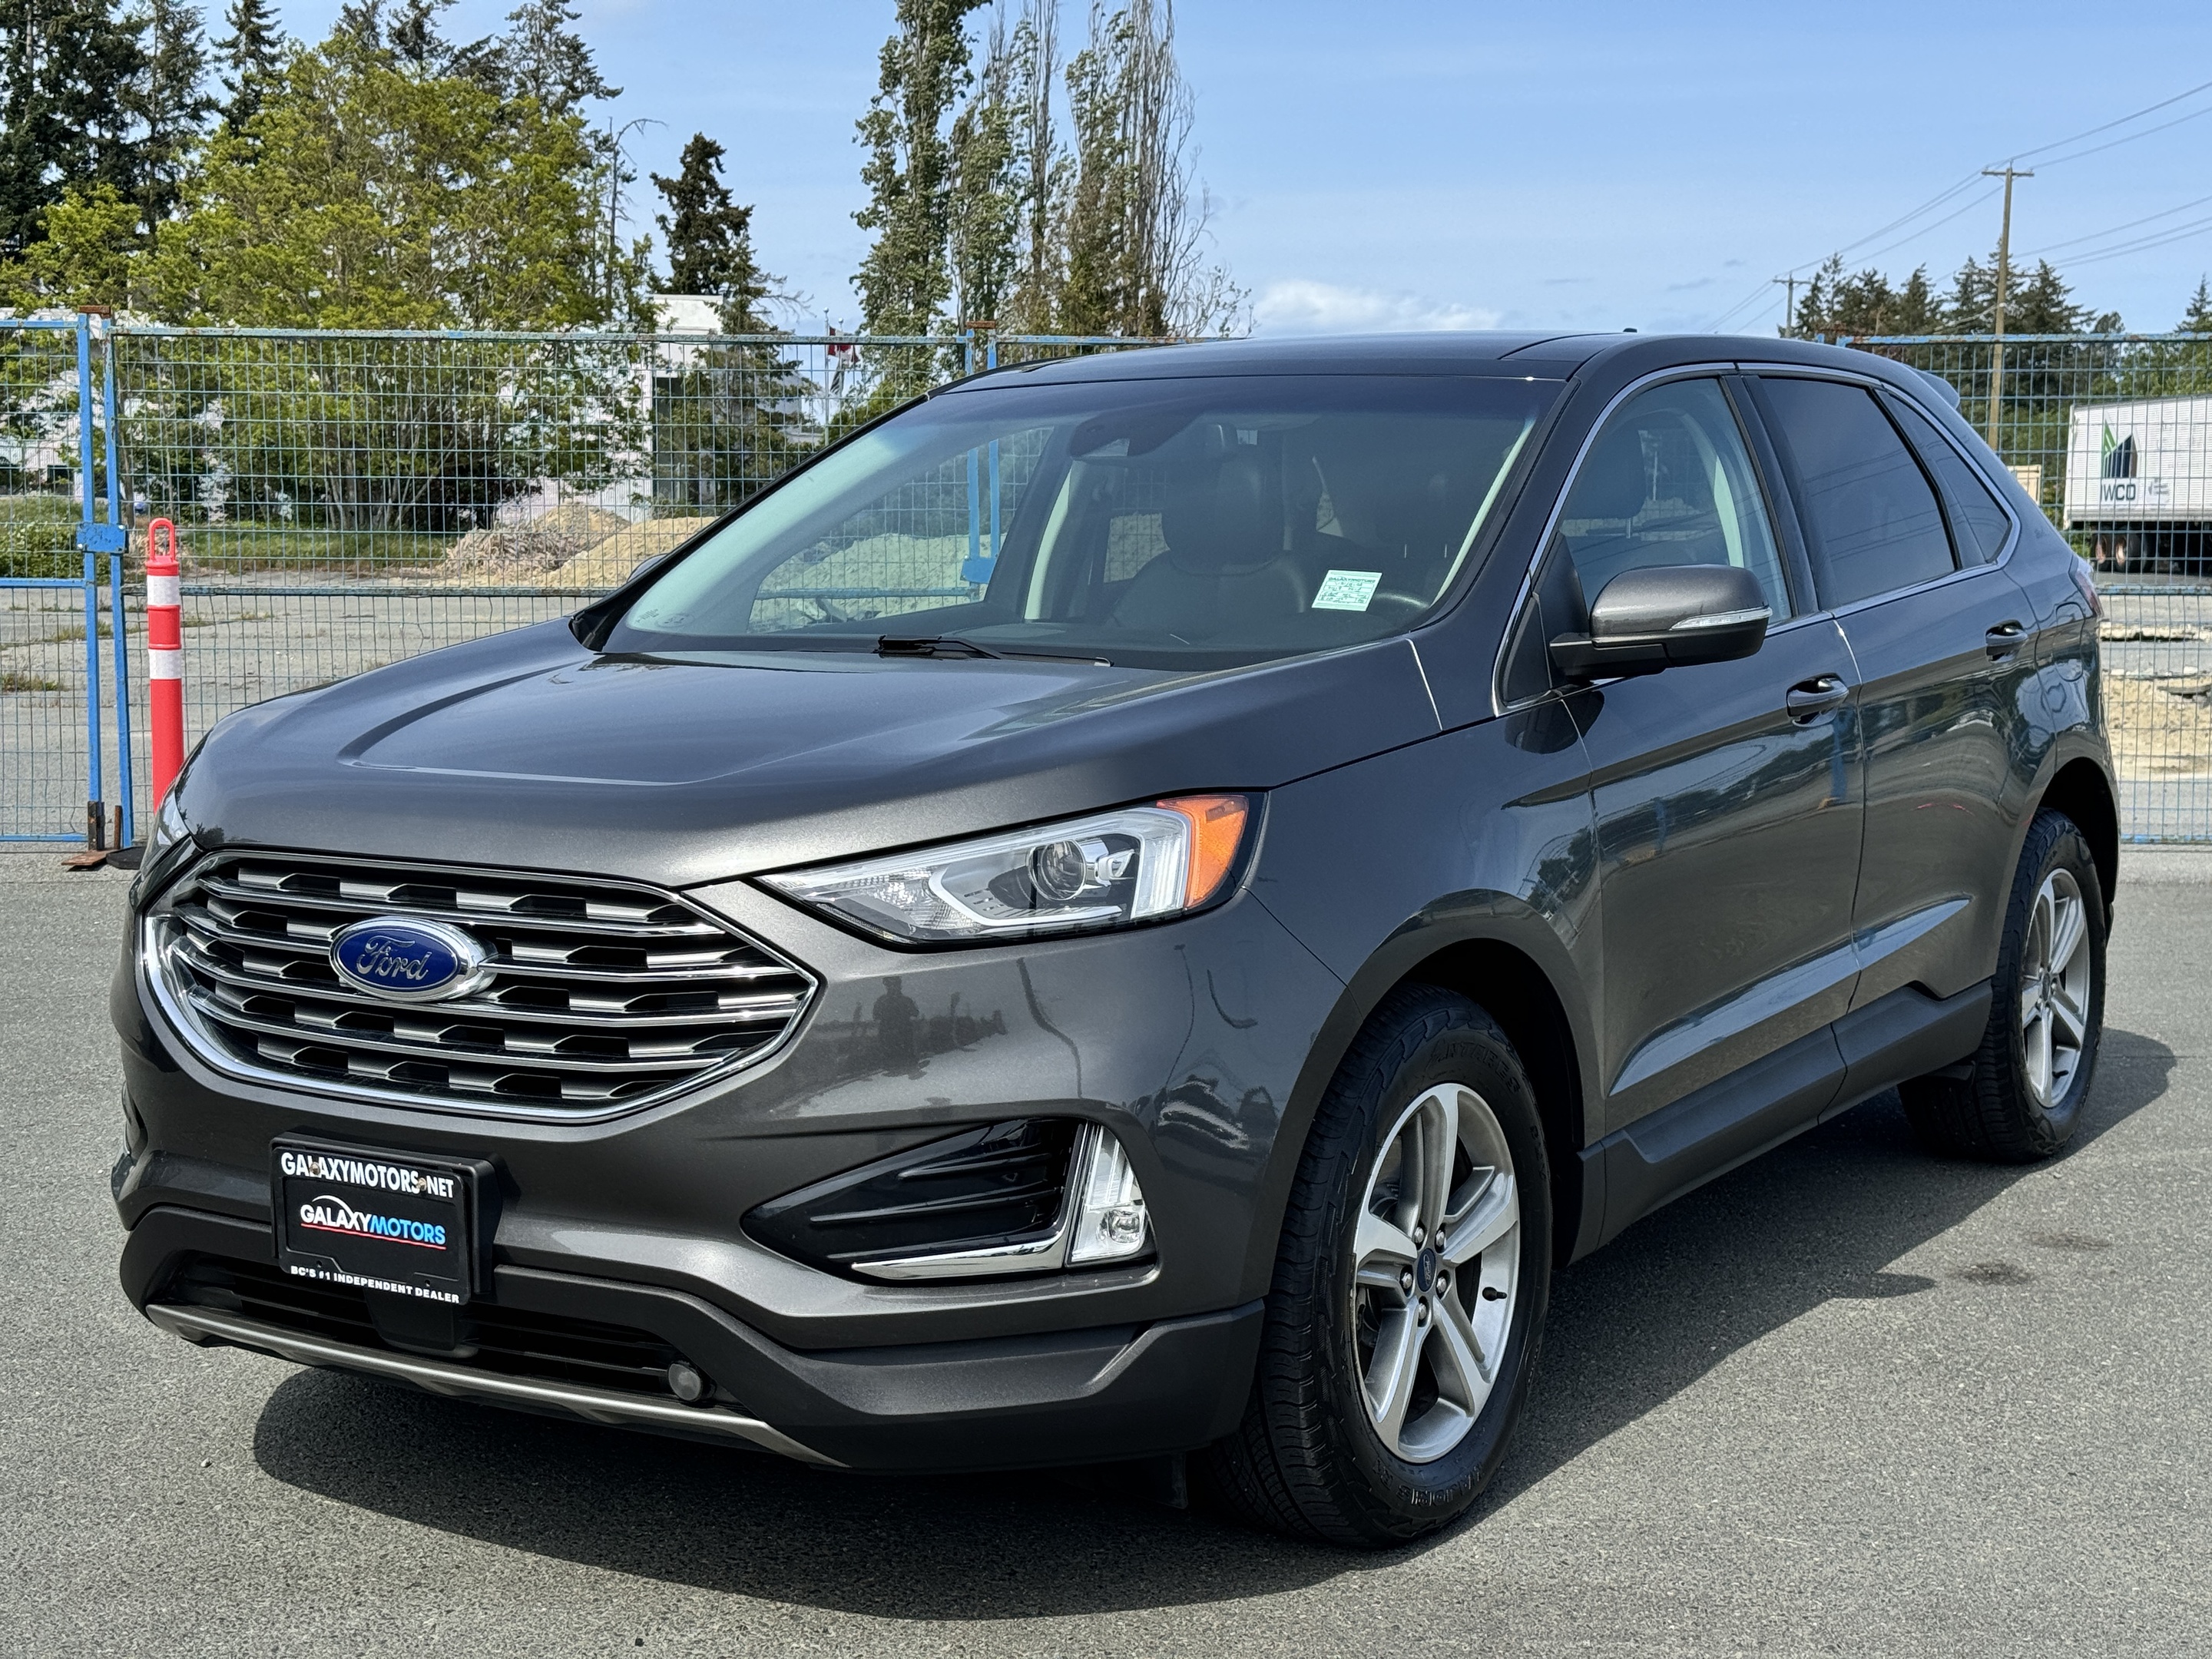 2019 Ford Edge SEL AWD- Front dual zone A/C, Auto Headlights